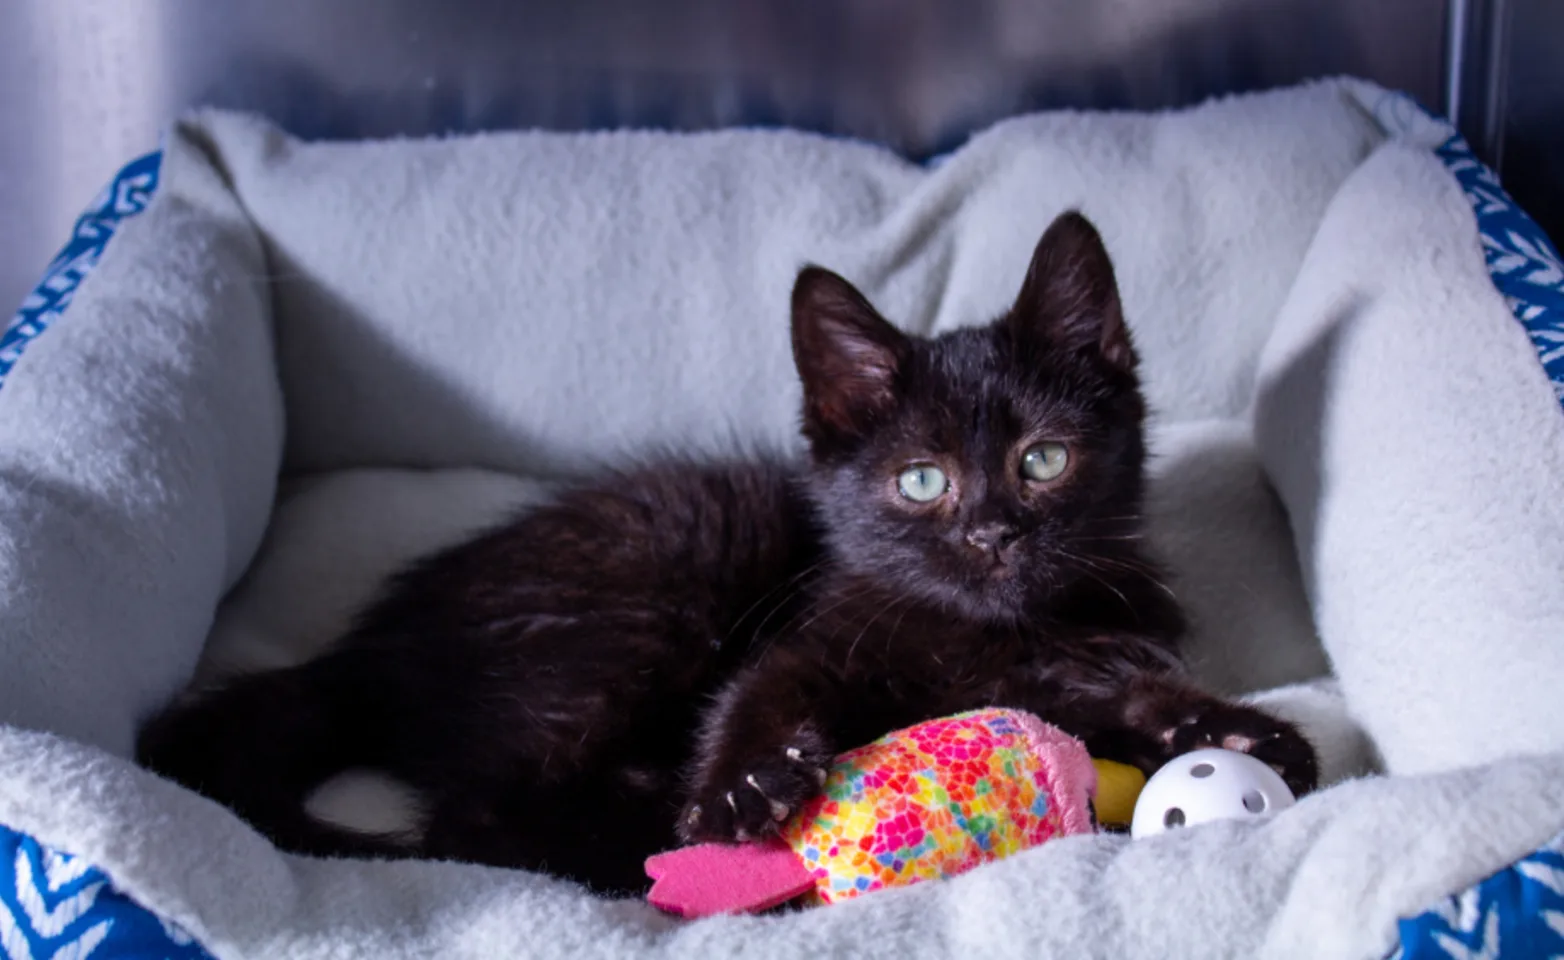 Black kitten in blue cat bed with cat toys